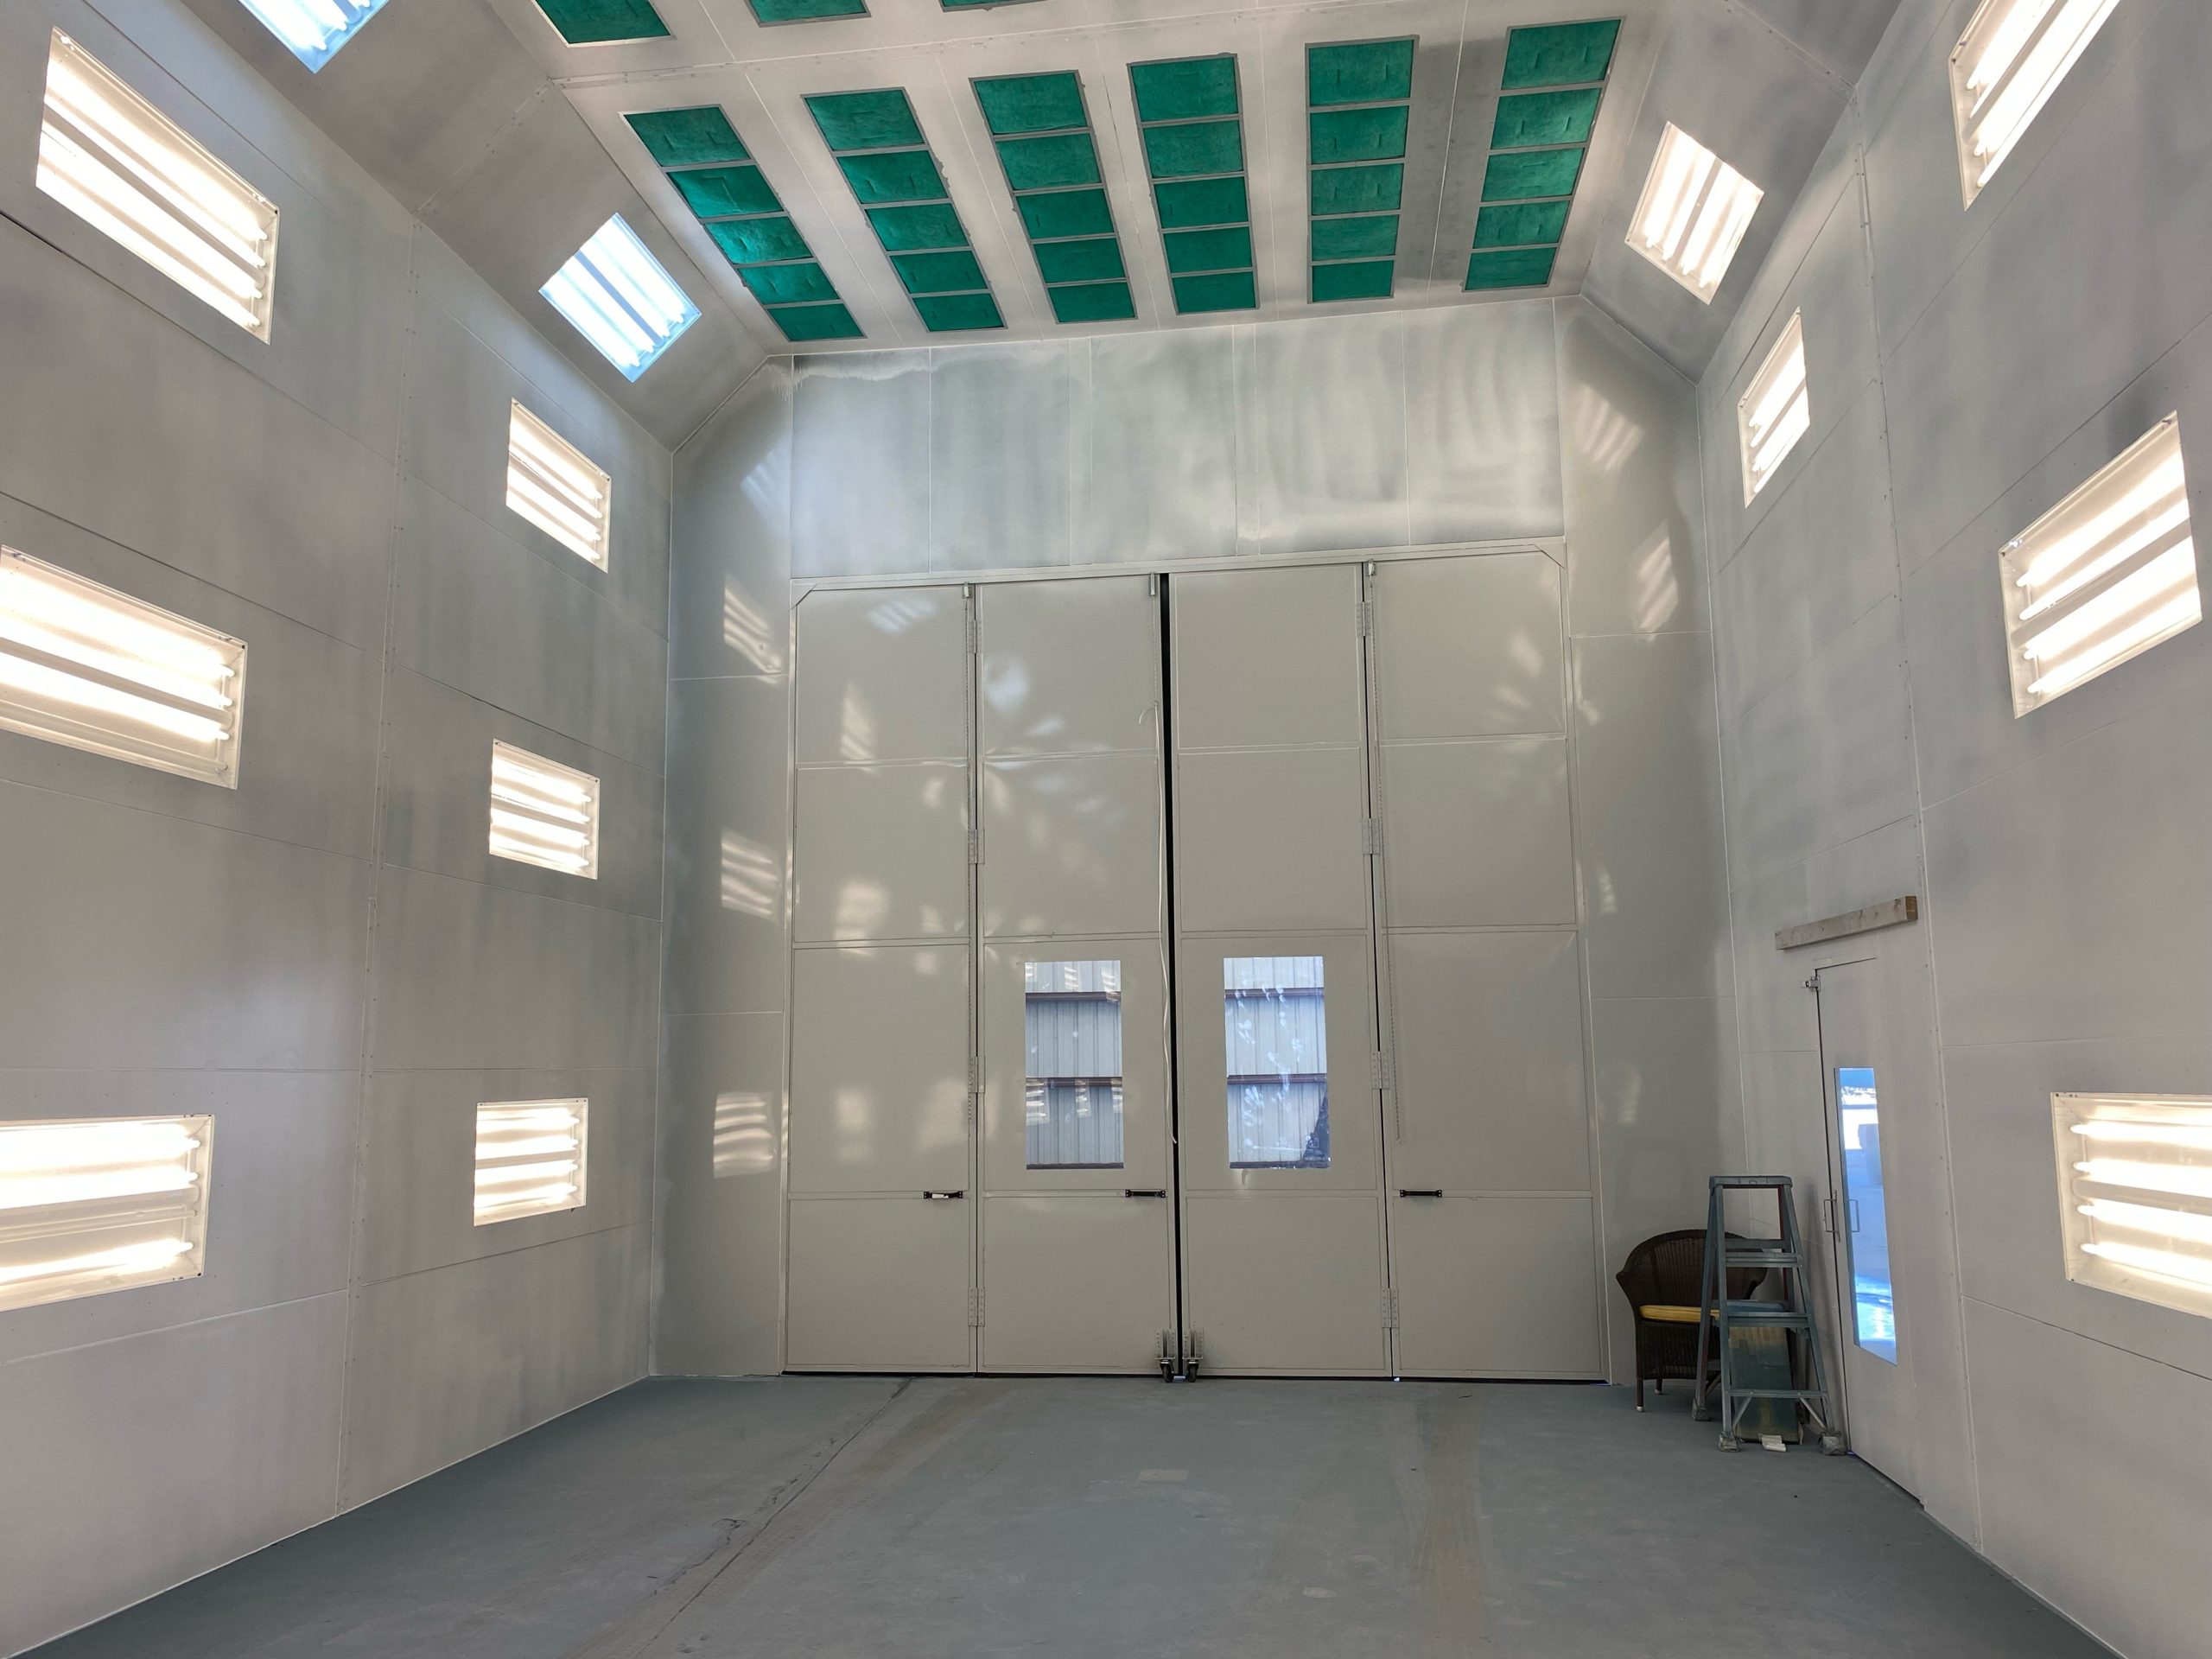 Key Benefits & Importance of Paint Booth Filters and Maintenance